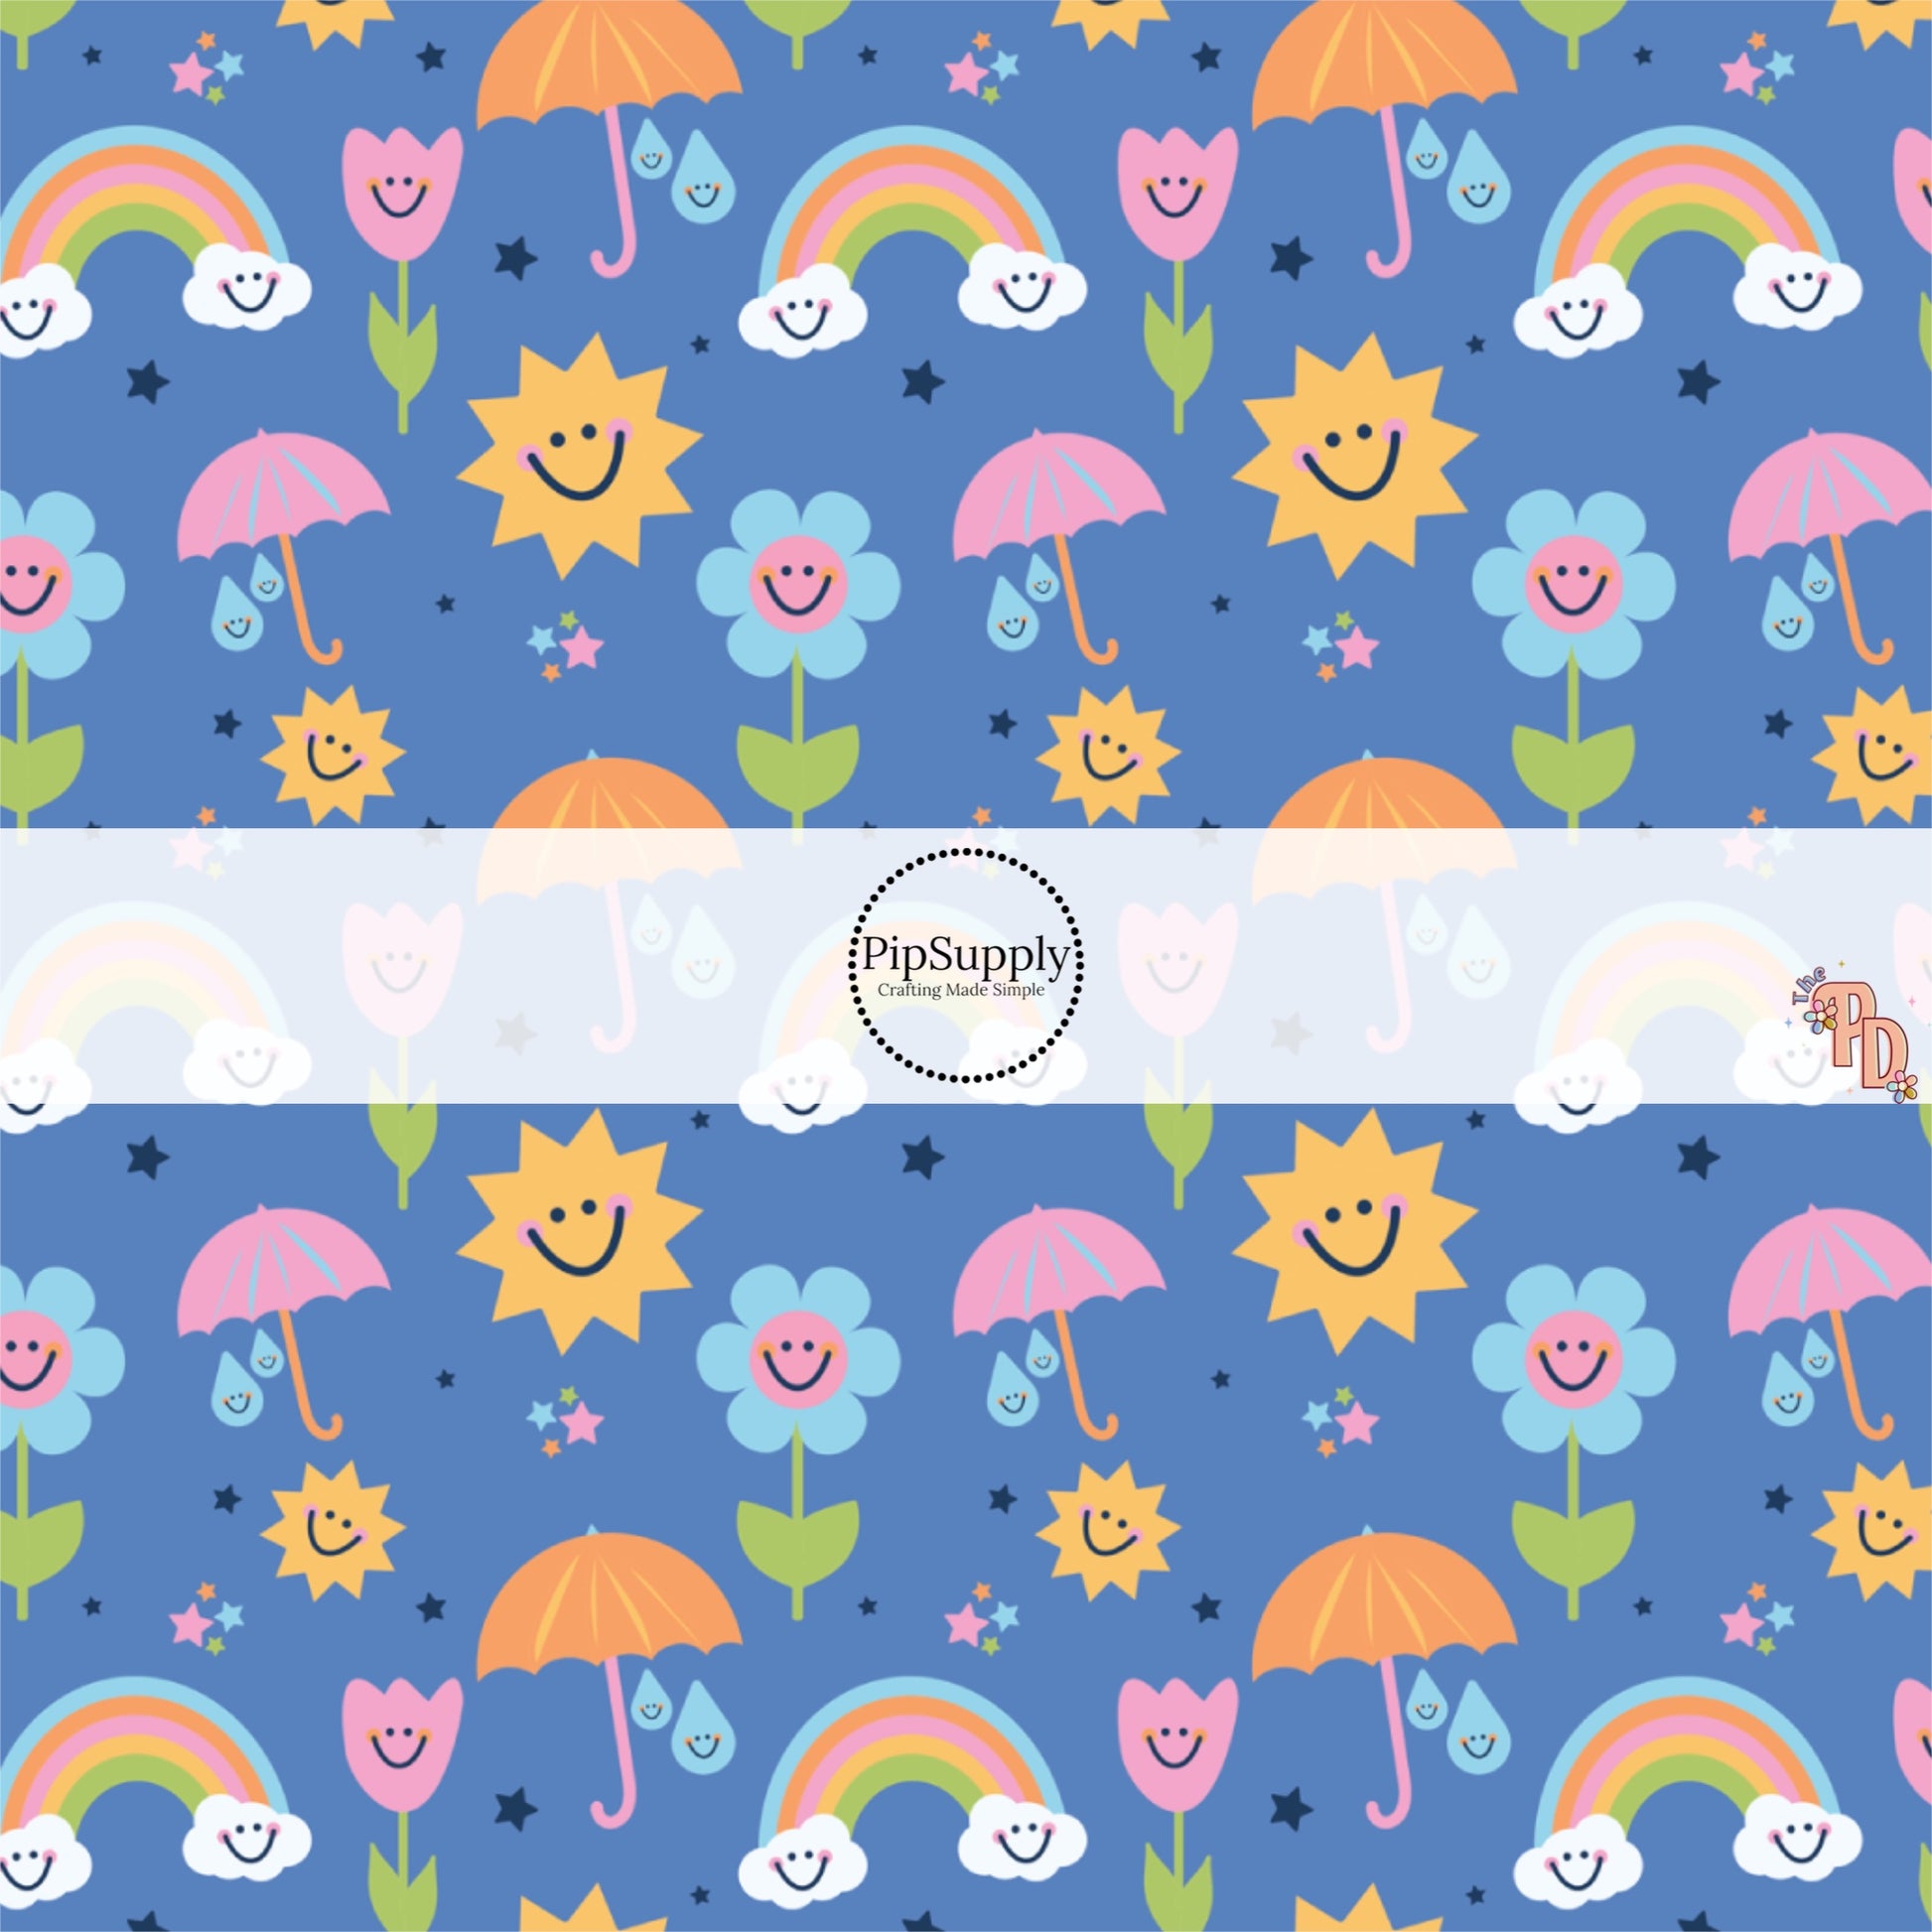 Smiley Face Flowers, Suns, Rainbows, Raindrops and Umbrellas on Blue Fabric by the Yard.